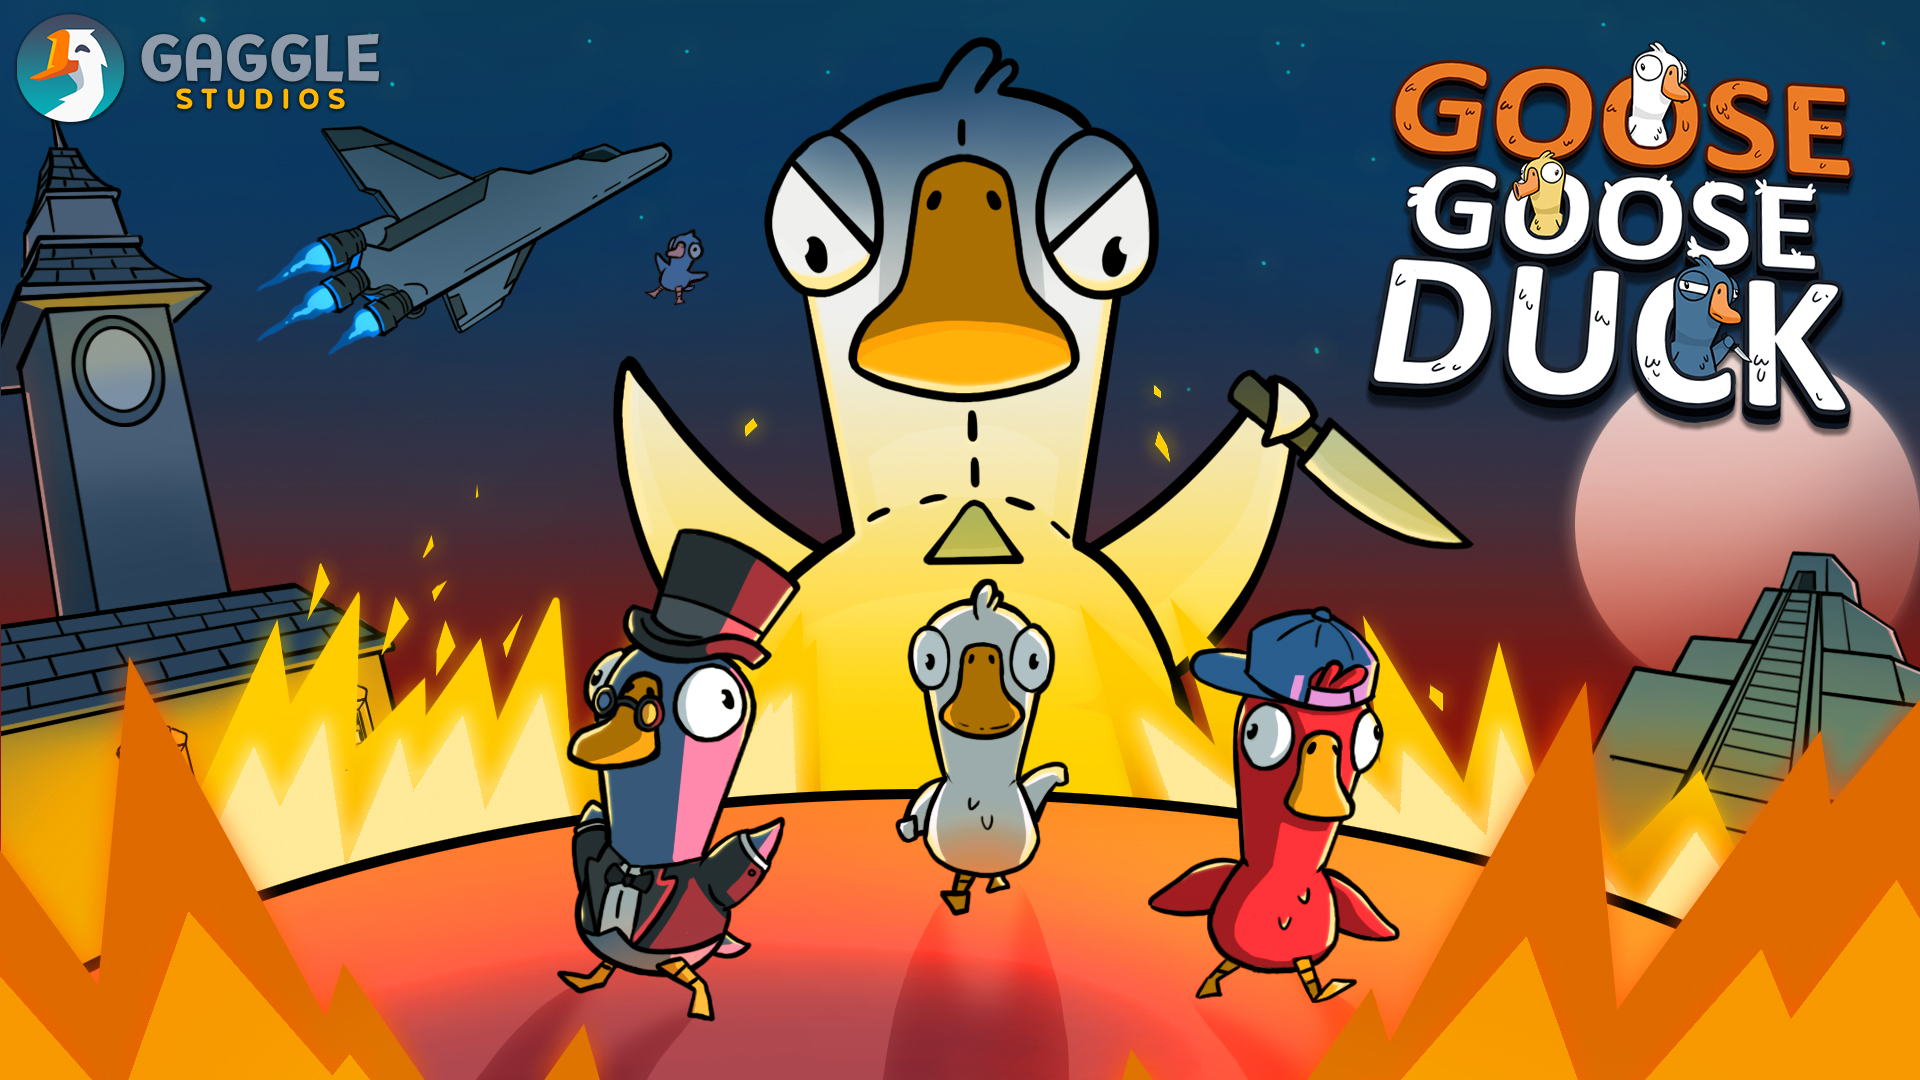 HD desktop wallpaper featuring characters from Goose Goose Duck game by Gaggle Studios, with a large duck in the center and smaller ducks wearing hats, against a fiery backdrop and spaceship.